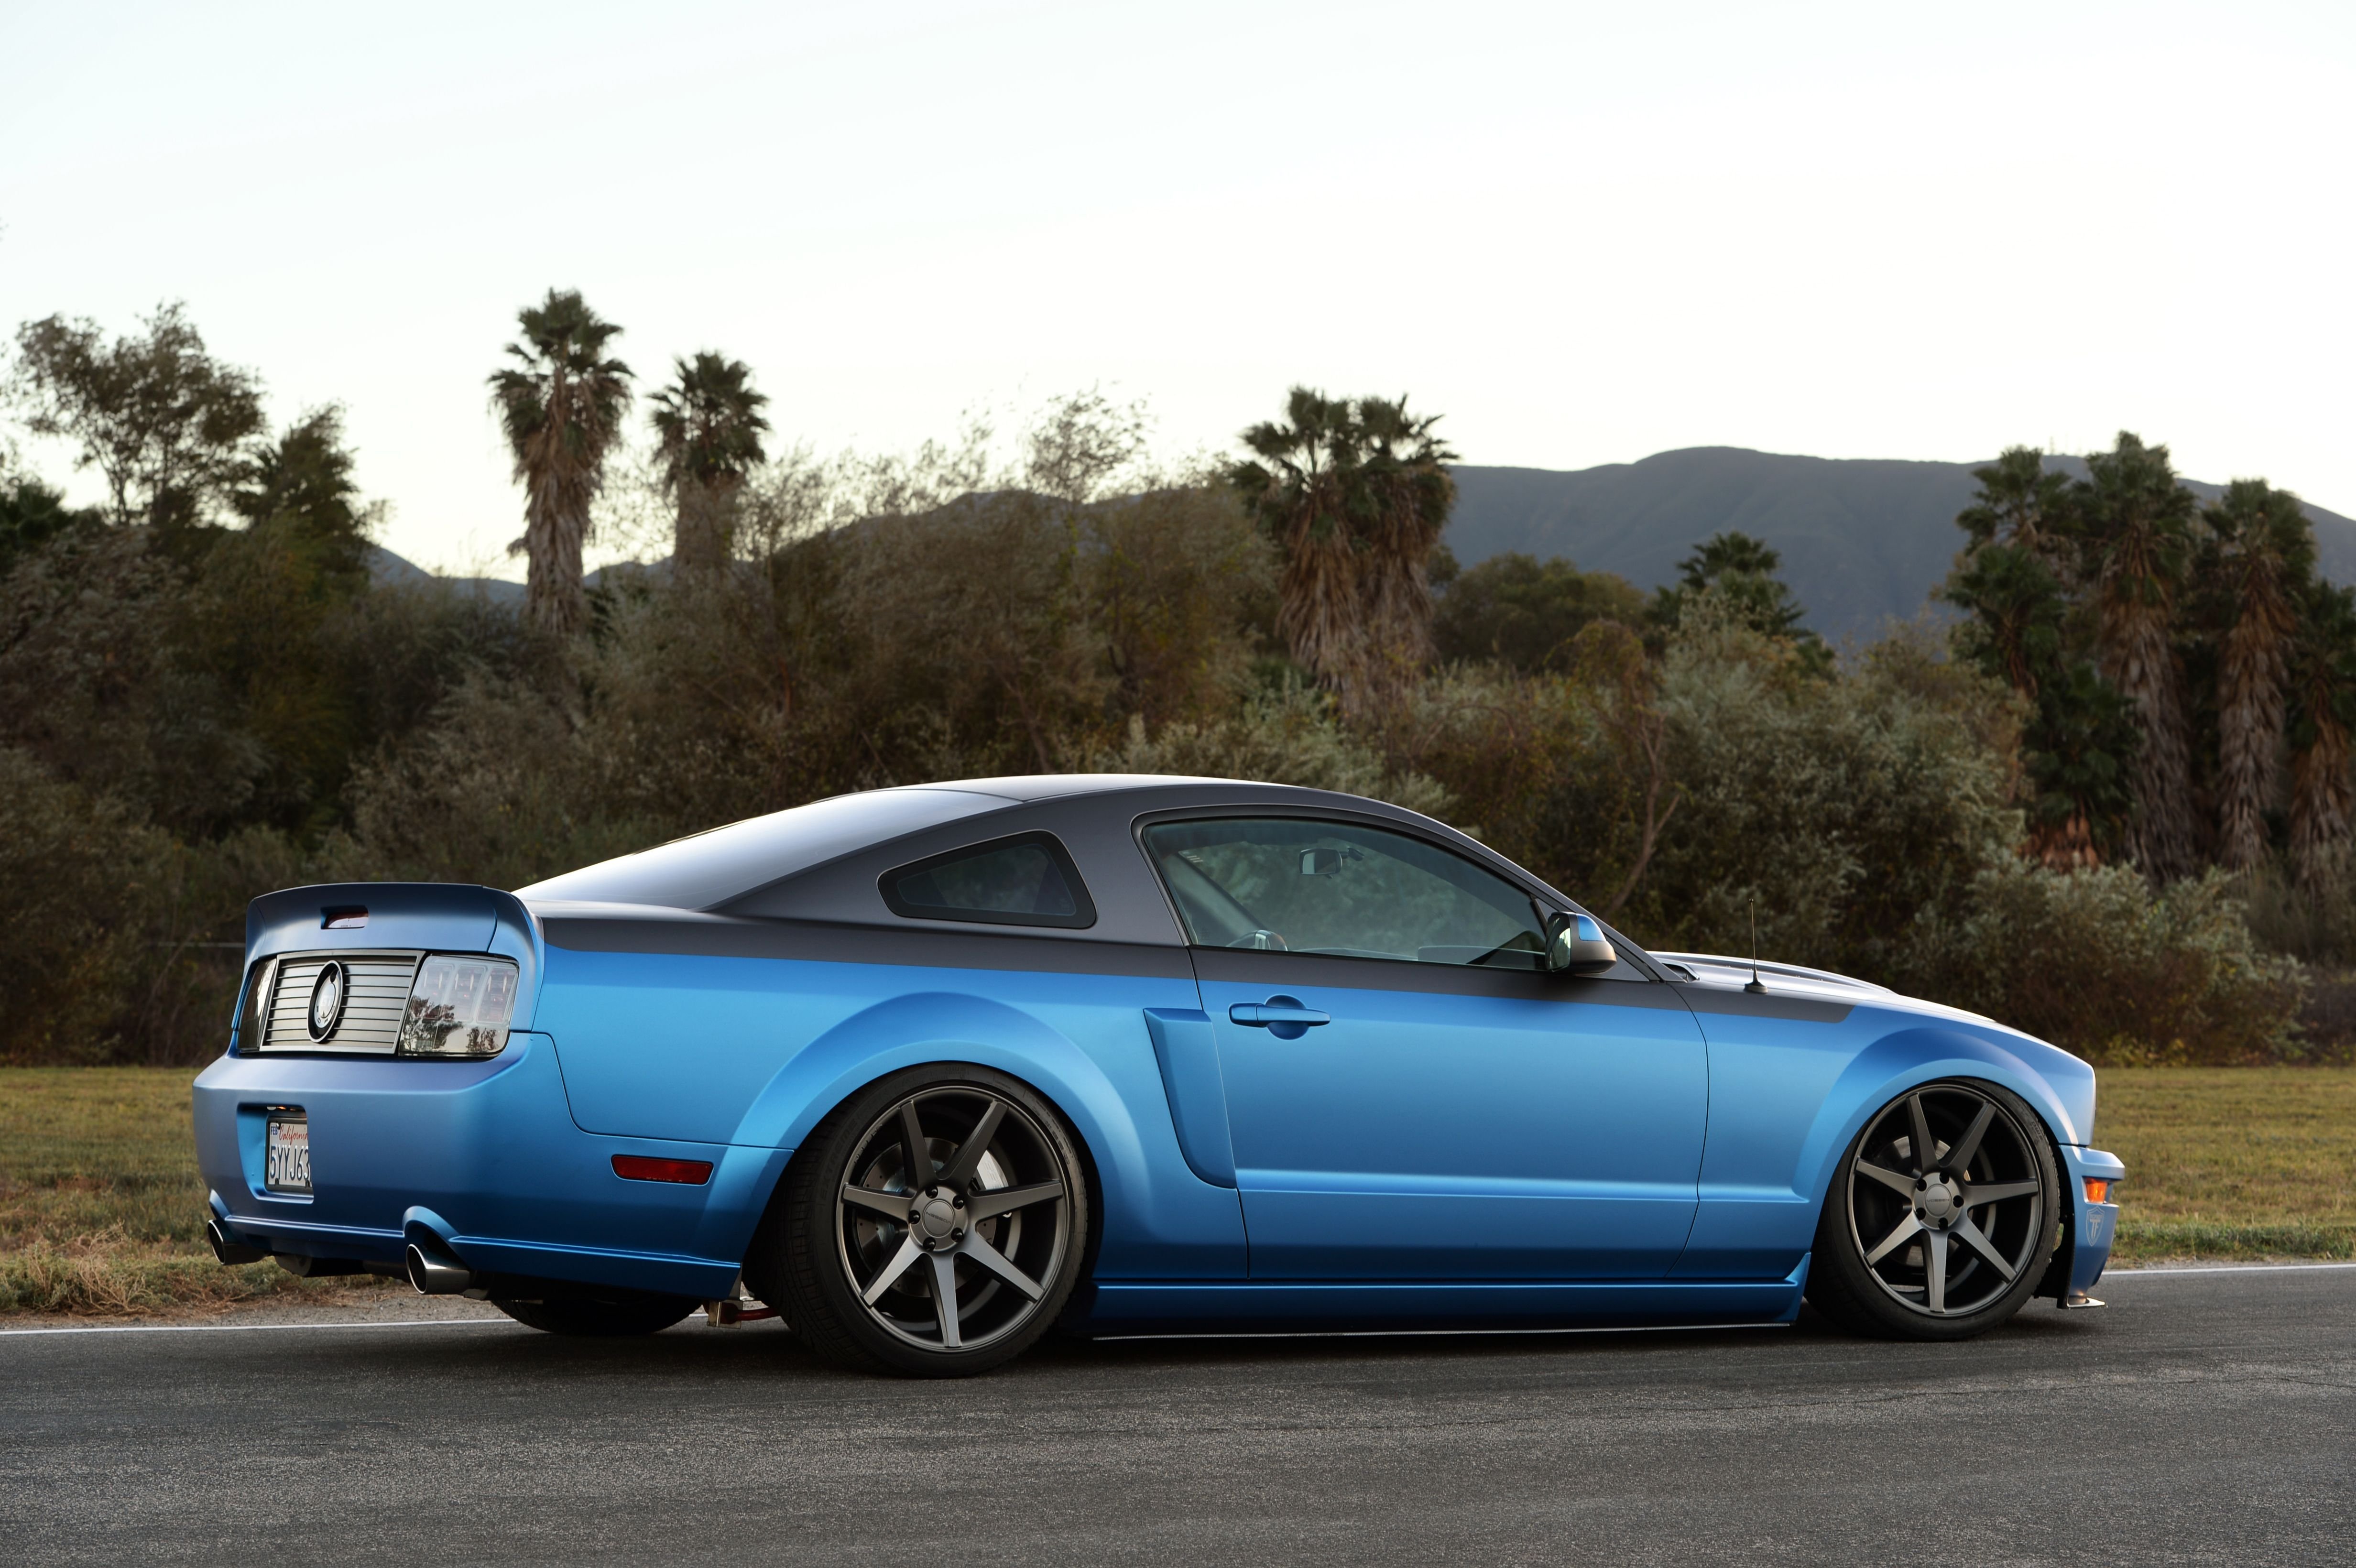 2005, Mustang, Gt, Ford, Blue, Modified, Cars Wallpaper